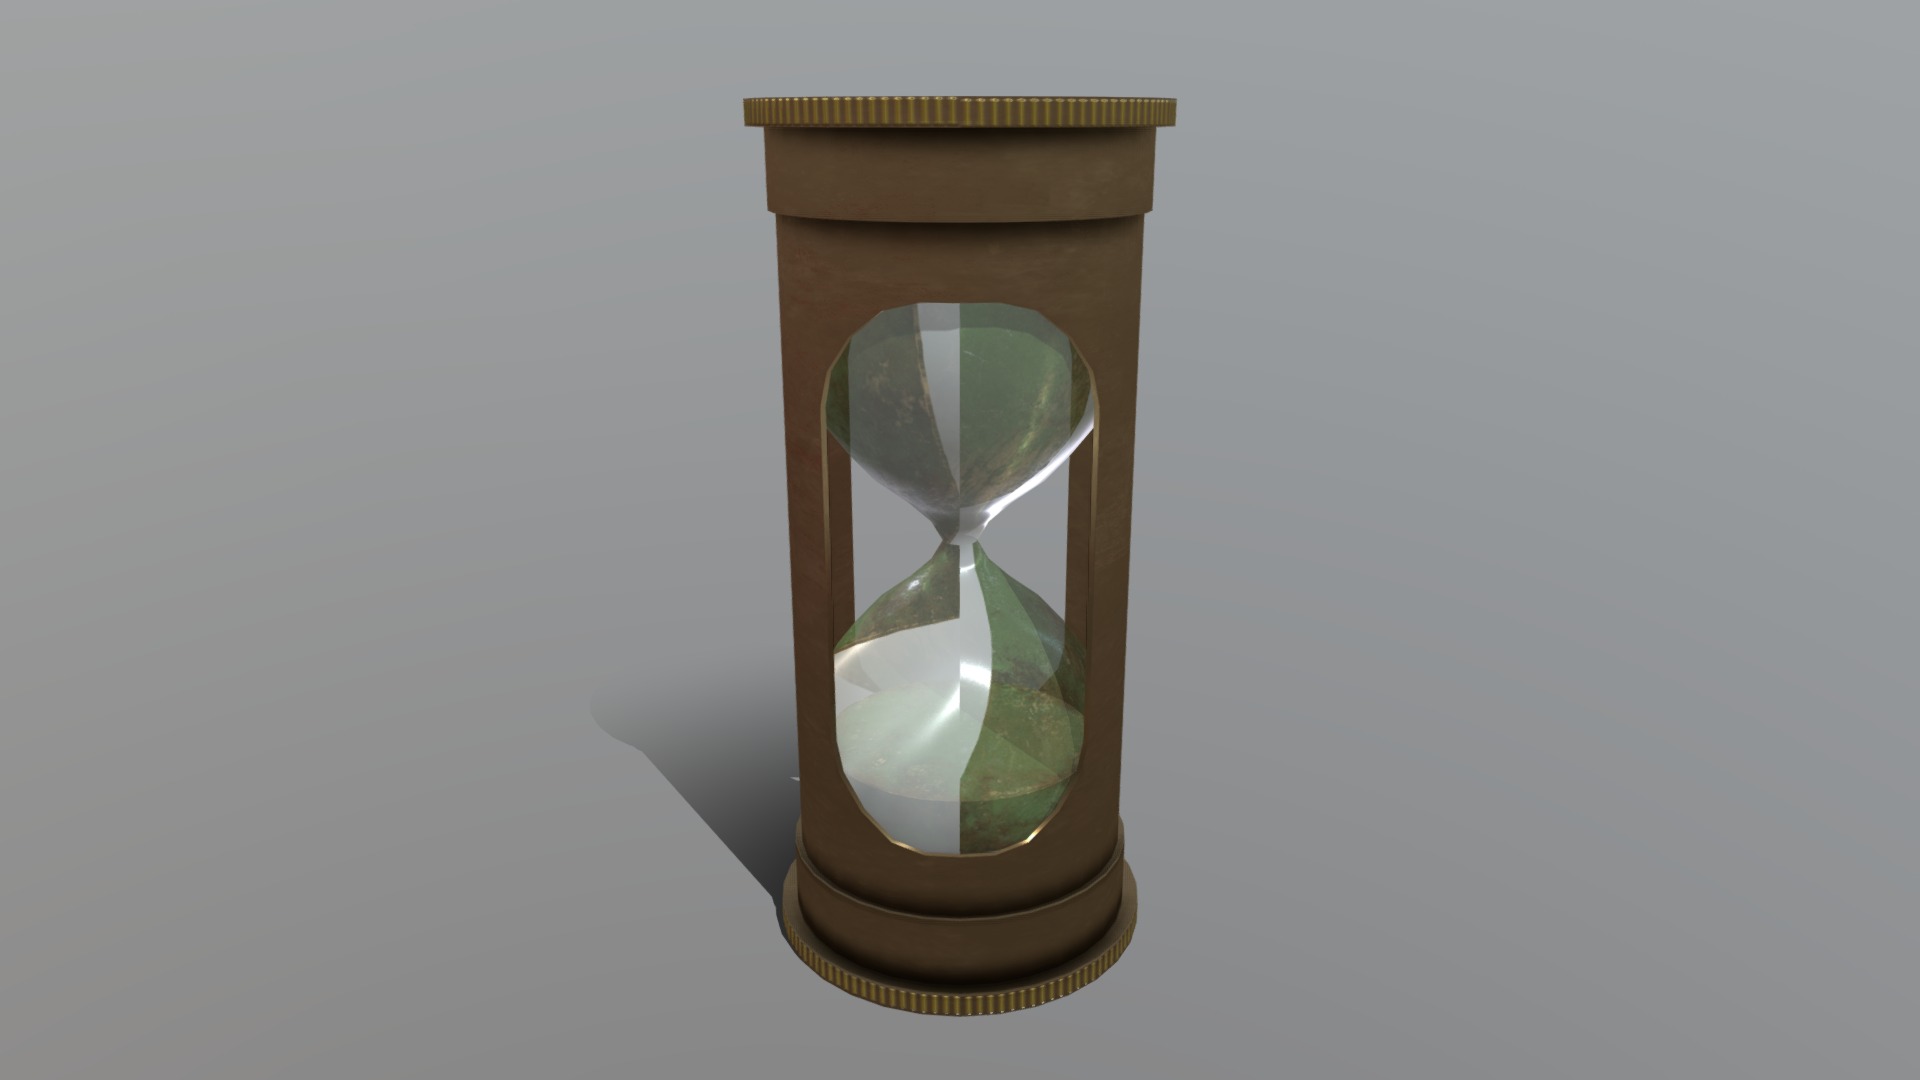 3D model Antique Hourglass - This is a 3D model of the Antique Hourglass. The 3D model is about a glass with a green liquid in it.